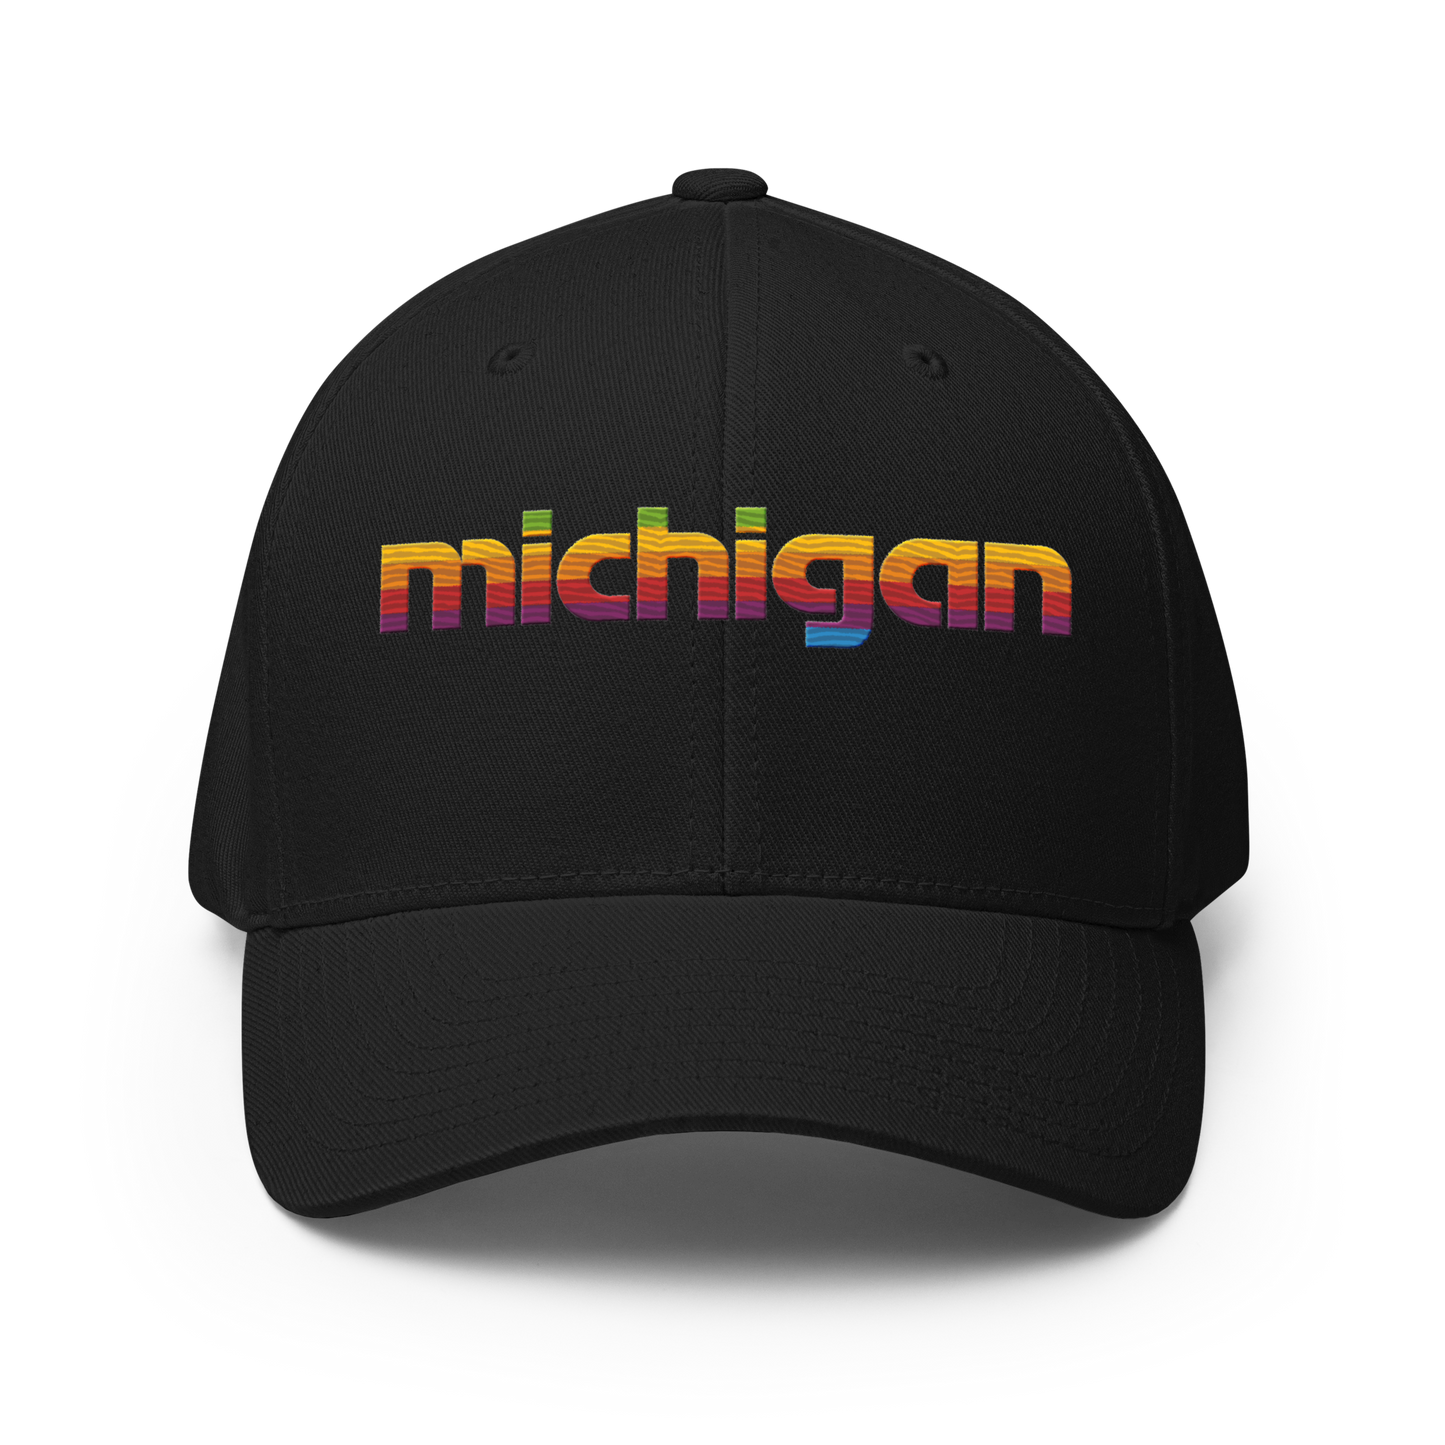 'Michigan' Fitted Baseball Cap | 80s Pomaceous Tech Parody